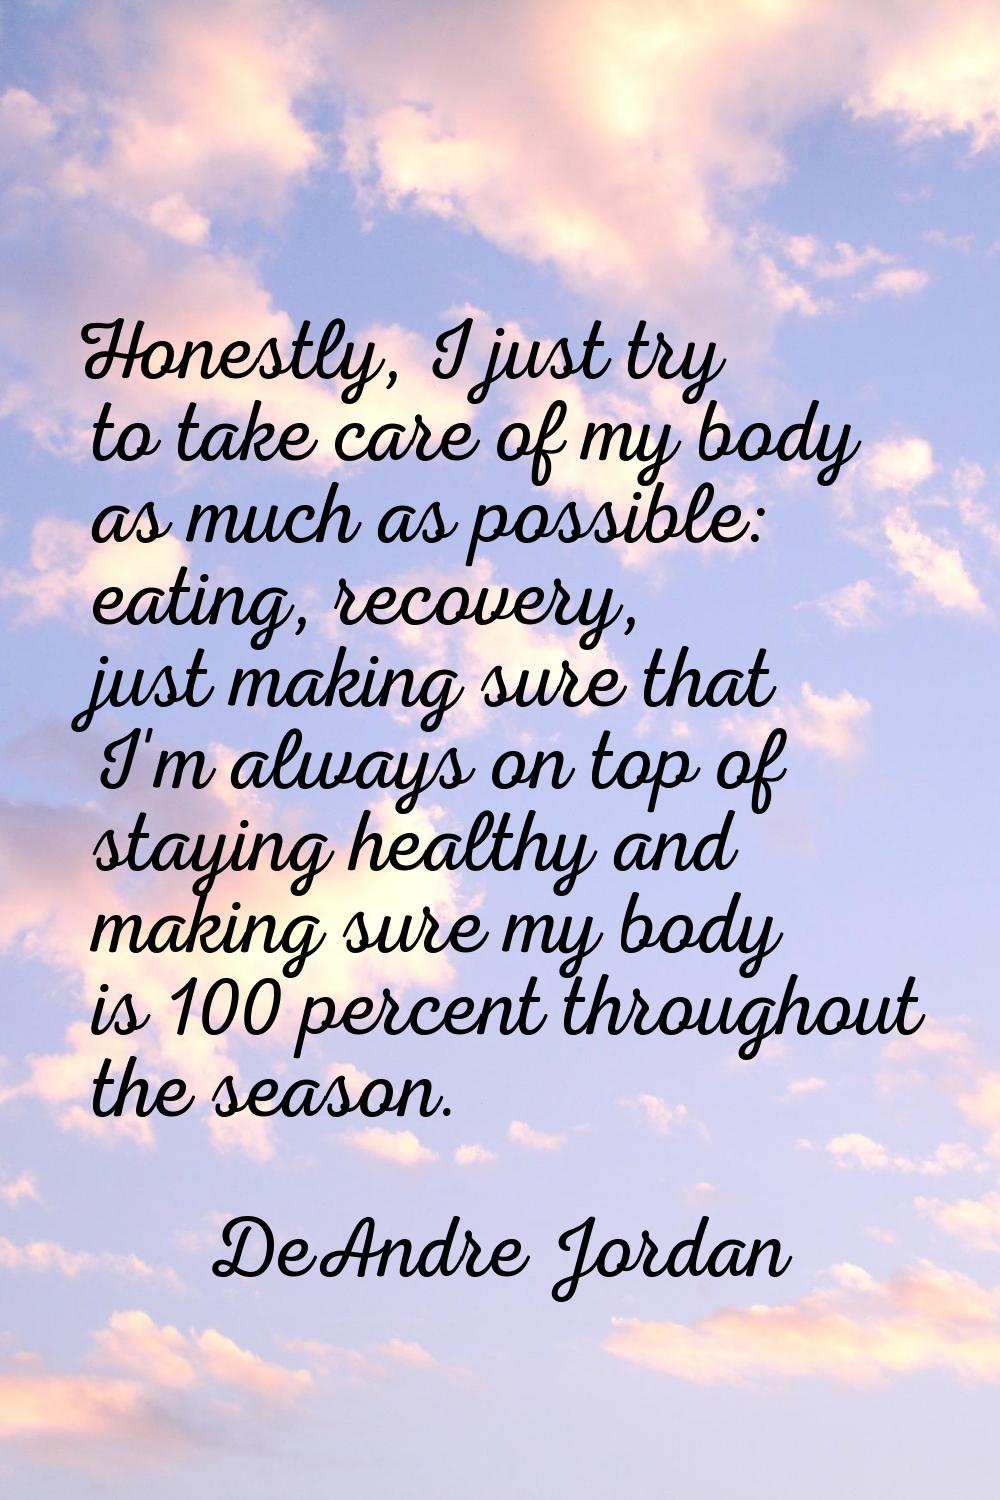 Honestly, I just try to take care of my body as much as possible: eating, recovery, just making sur